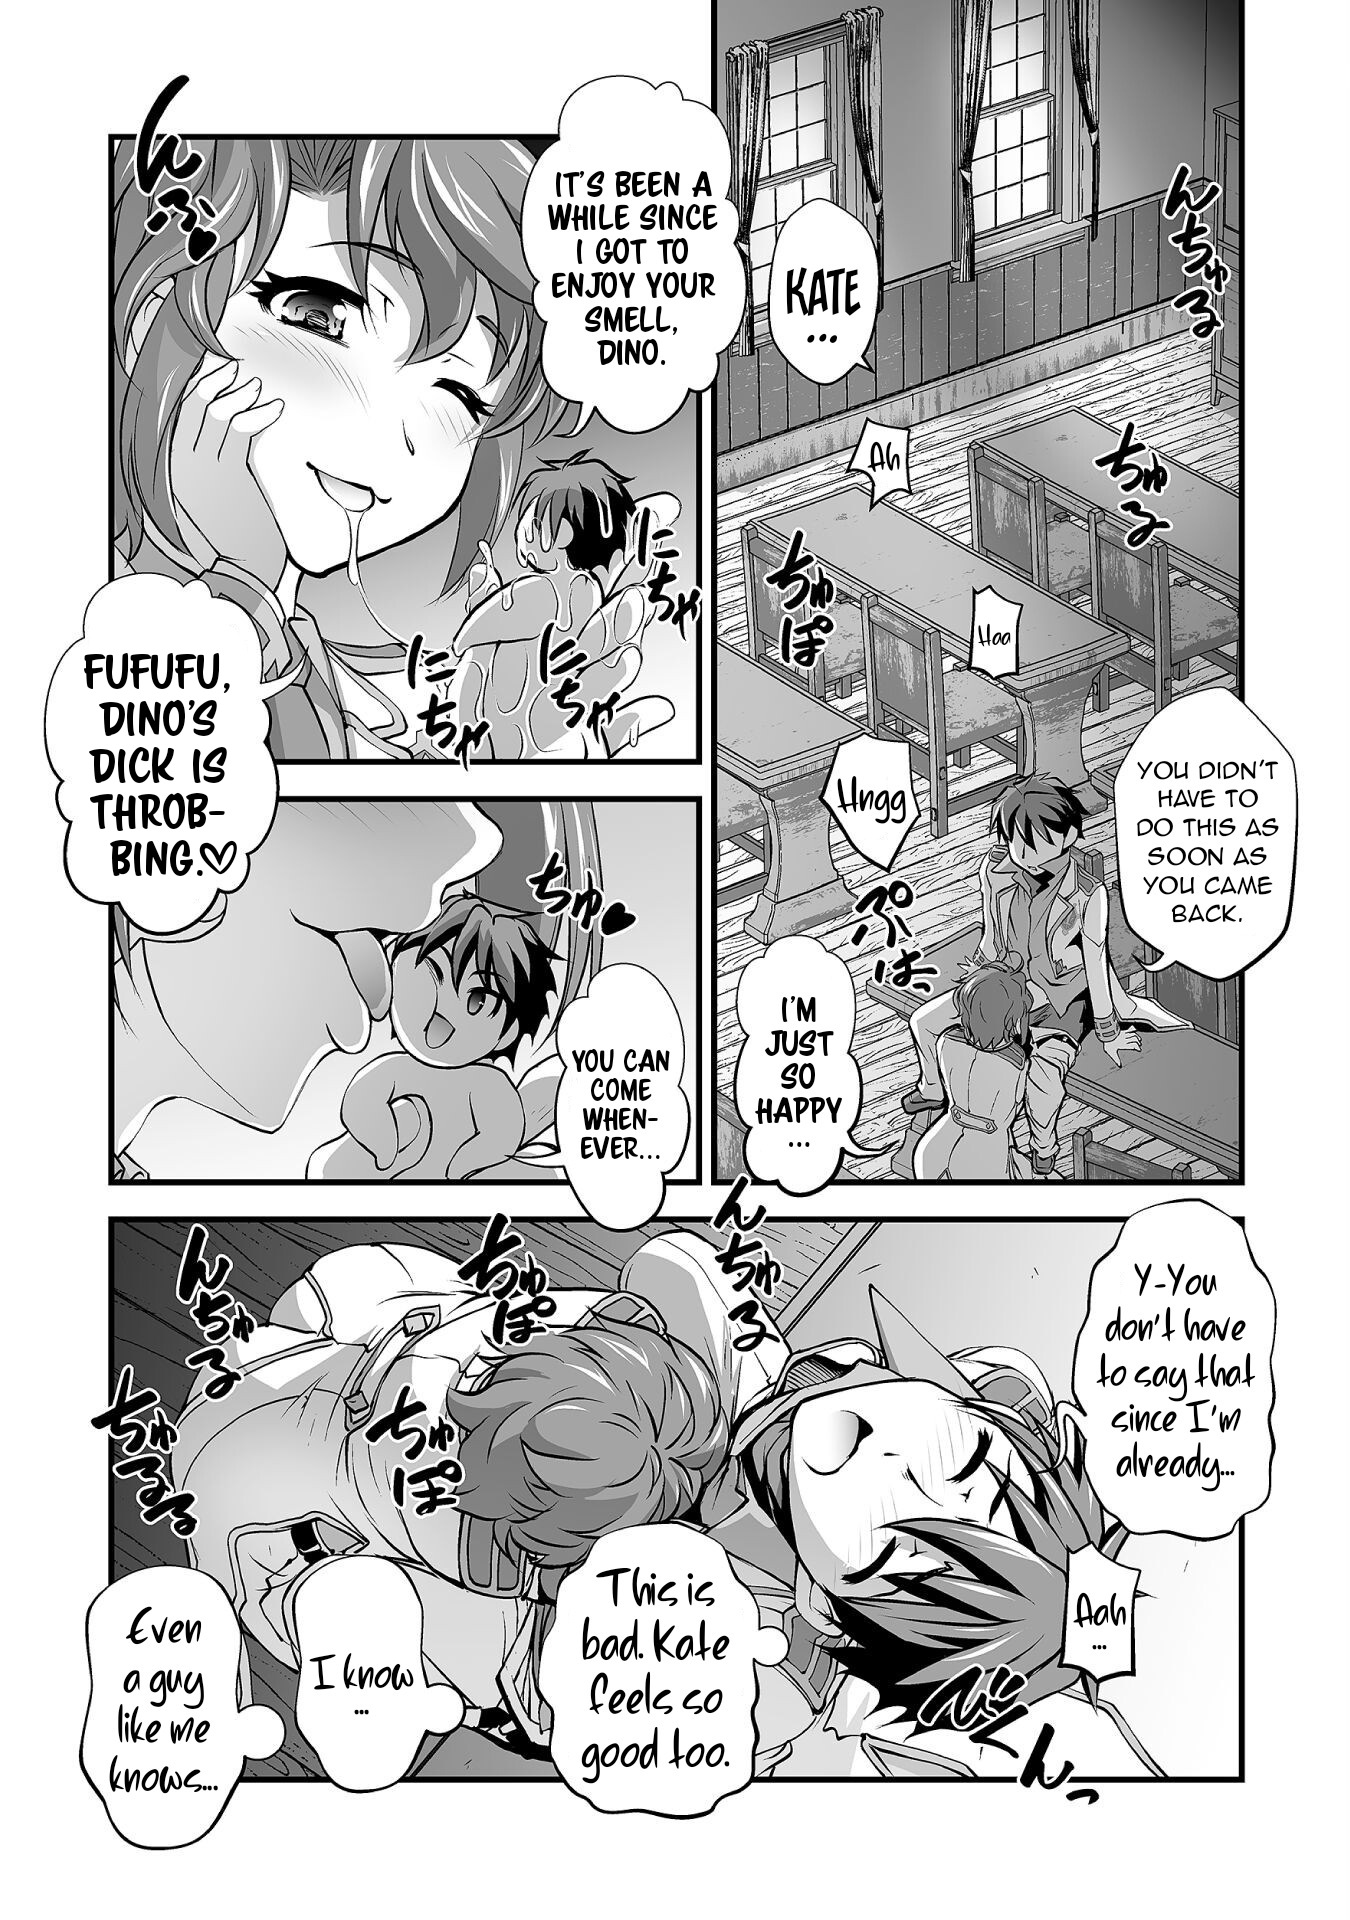 The Reward For Keeping Quiet Was Sex With Girls Dressed As Men Vol.2 Chapter 12